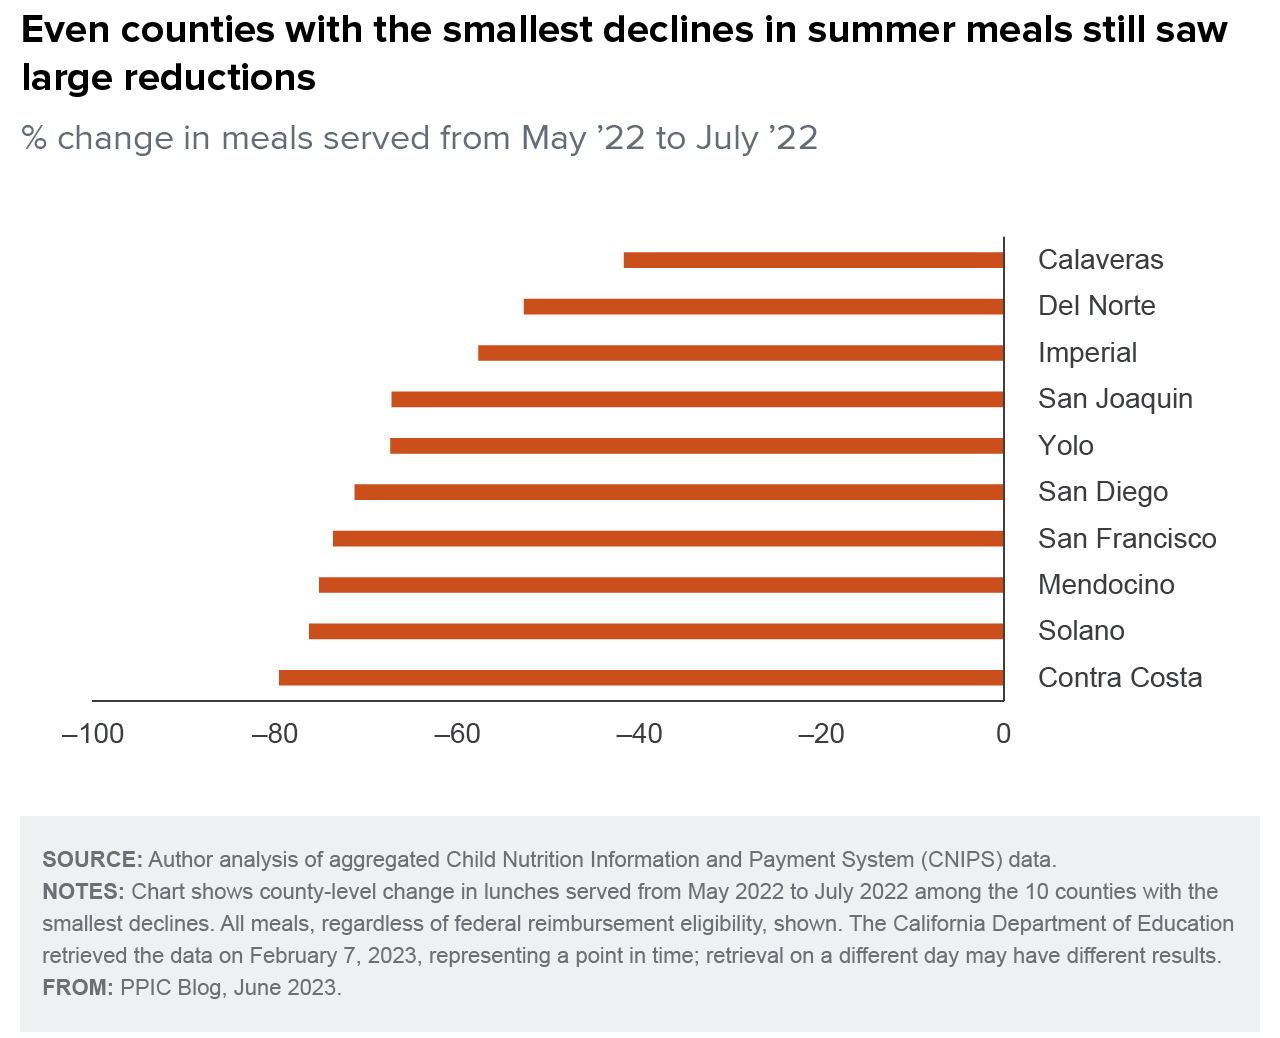 figure - Even counties with the smallest declines in summer meals still saw large reductions